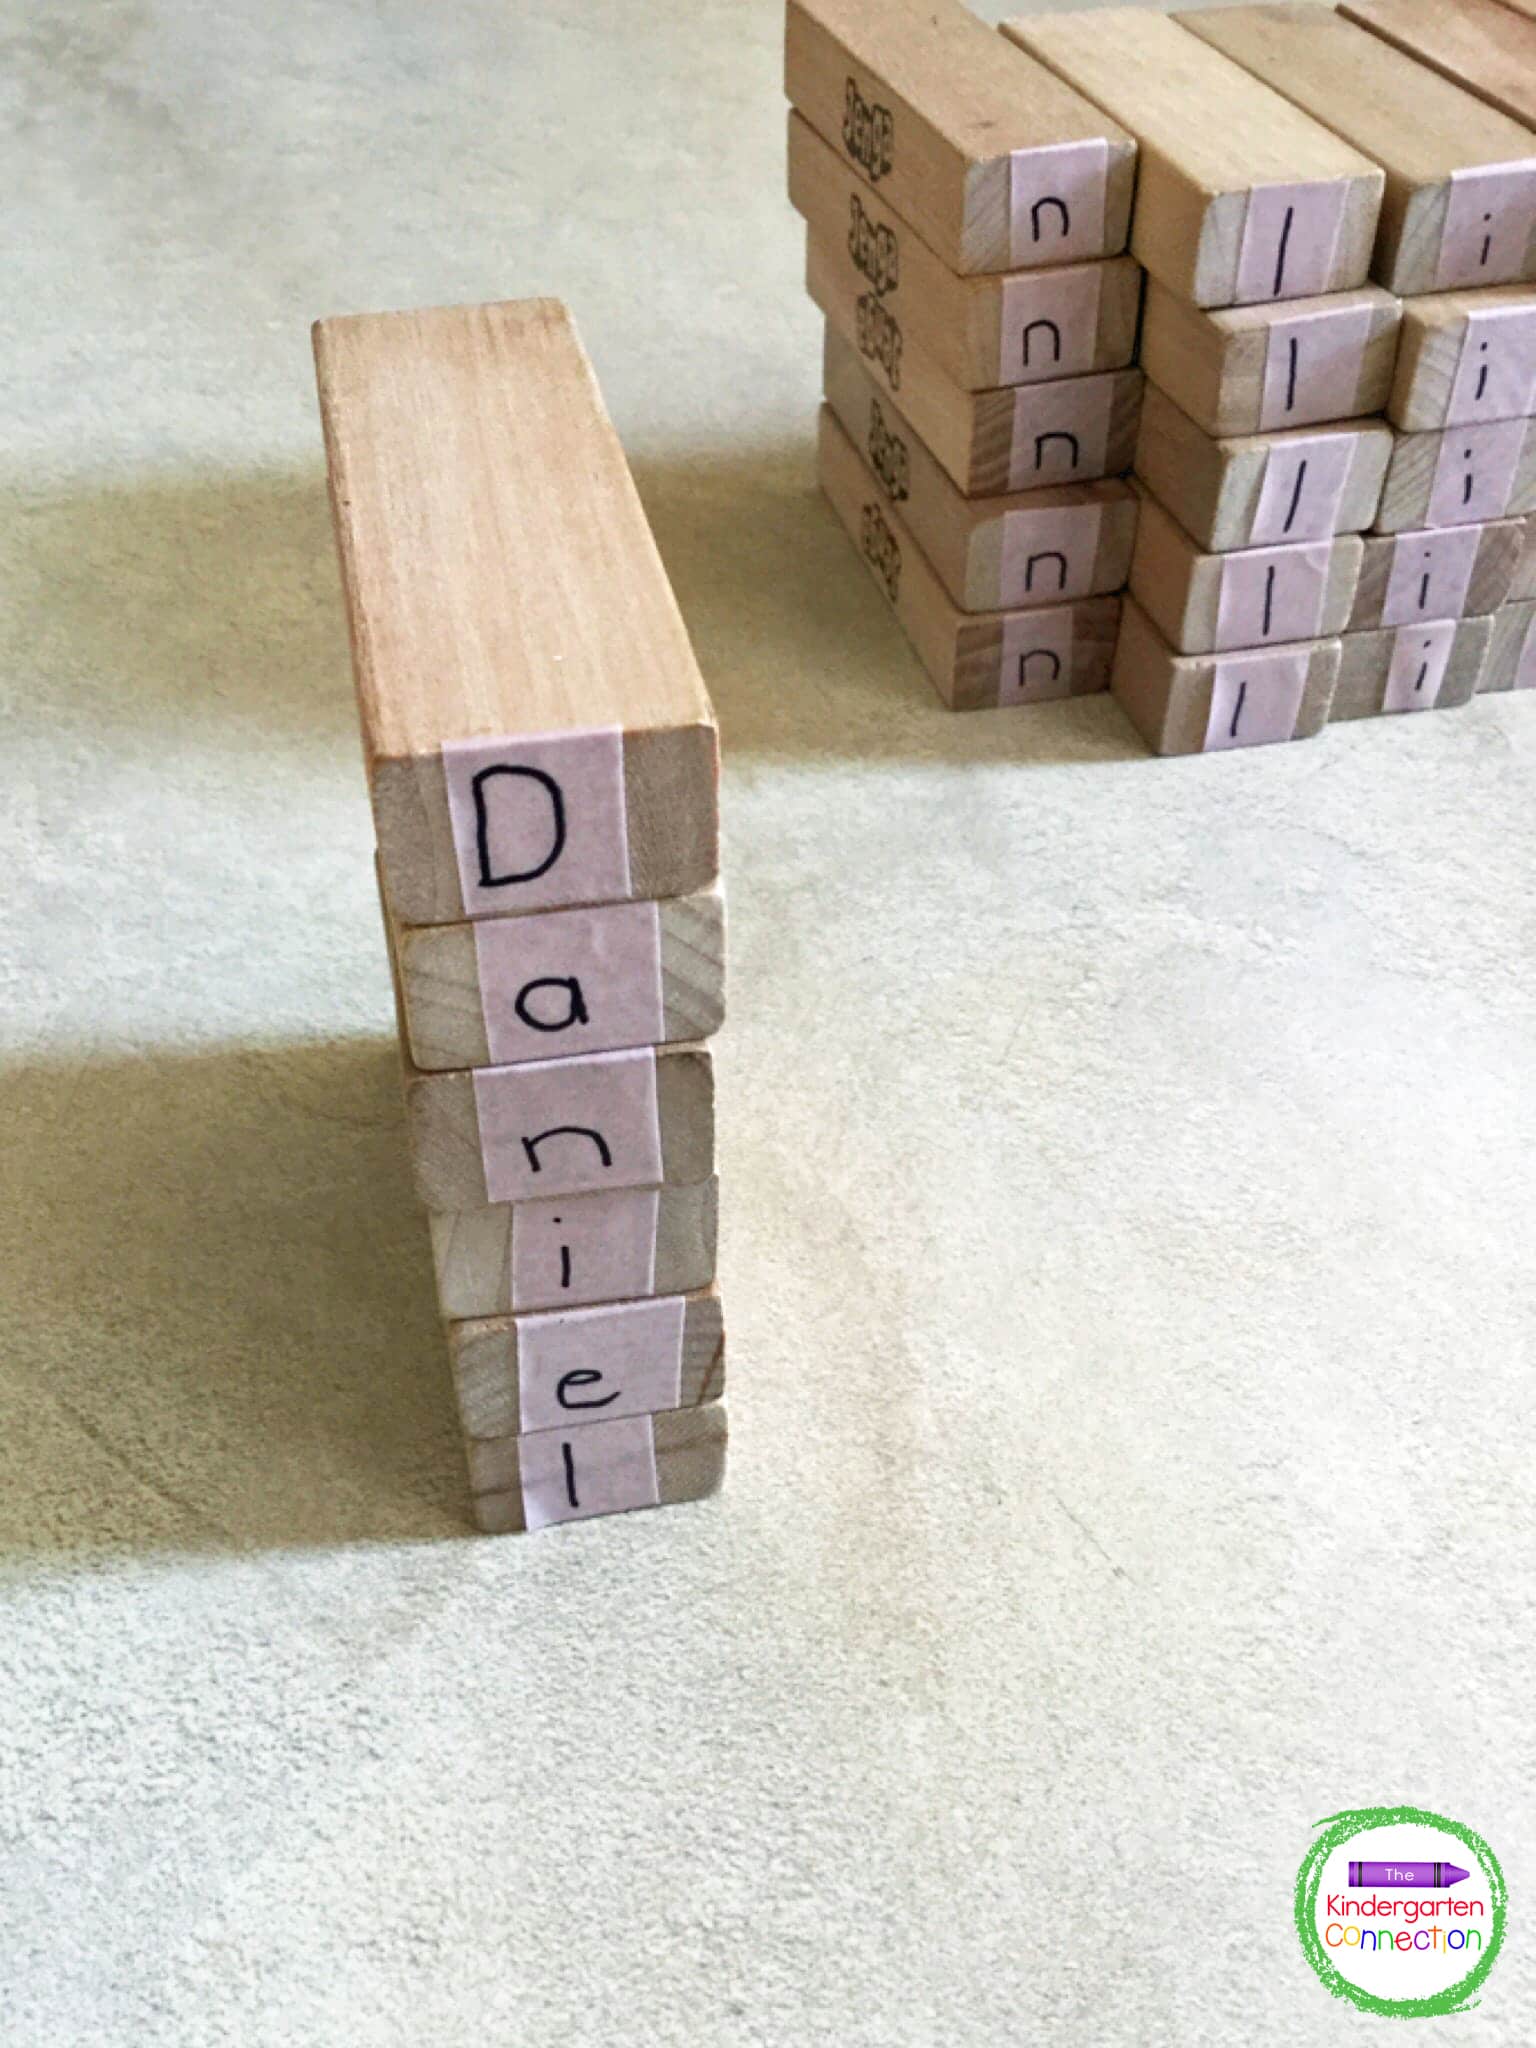 As extra practice, students can build their names vertically, too.